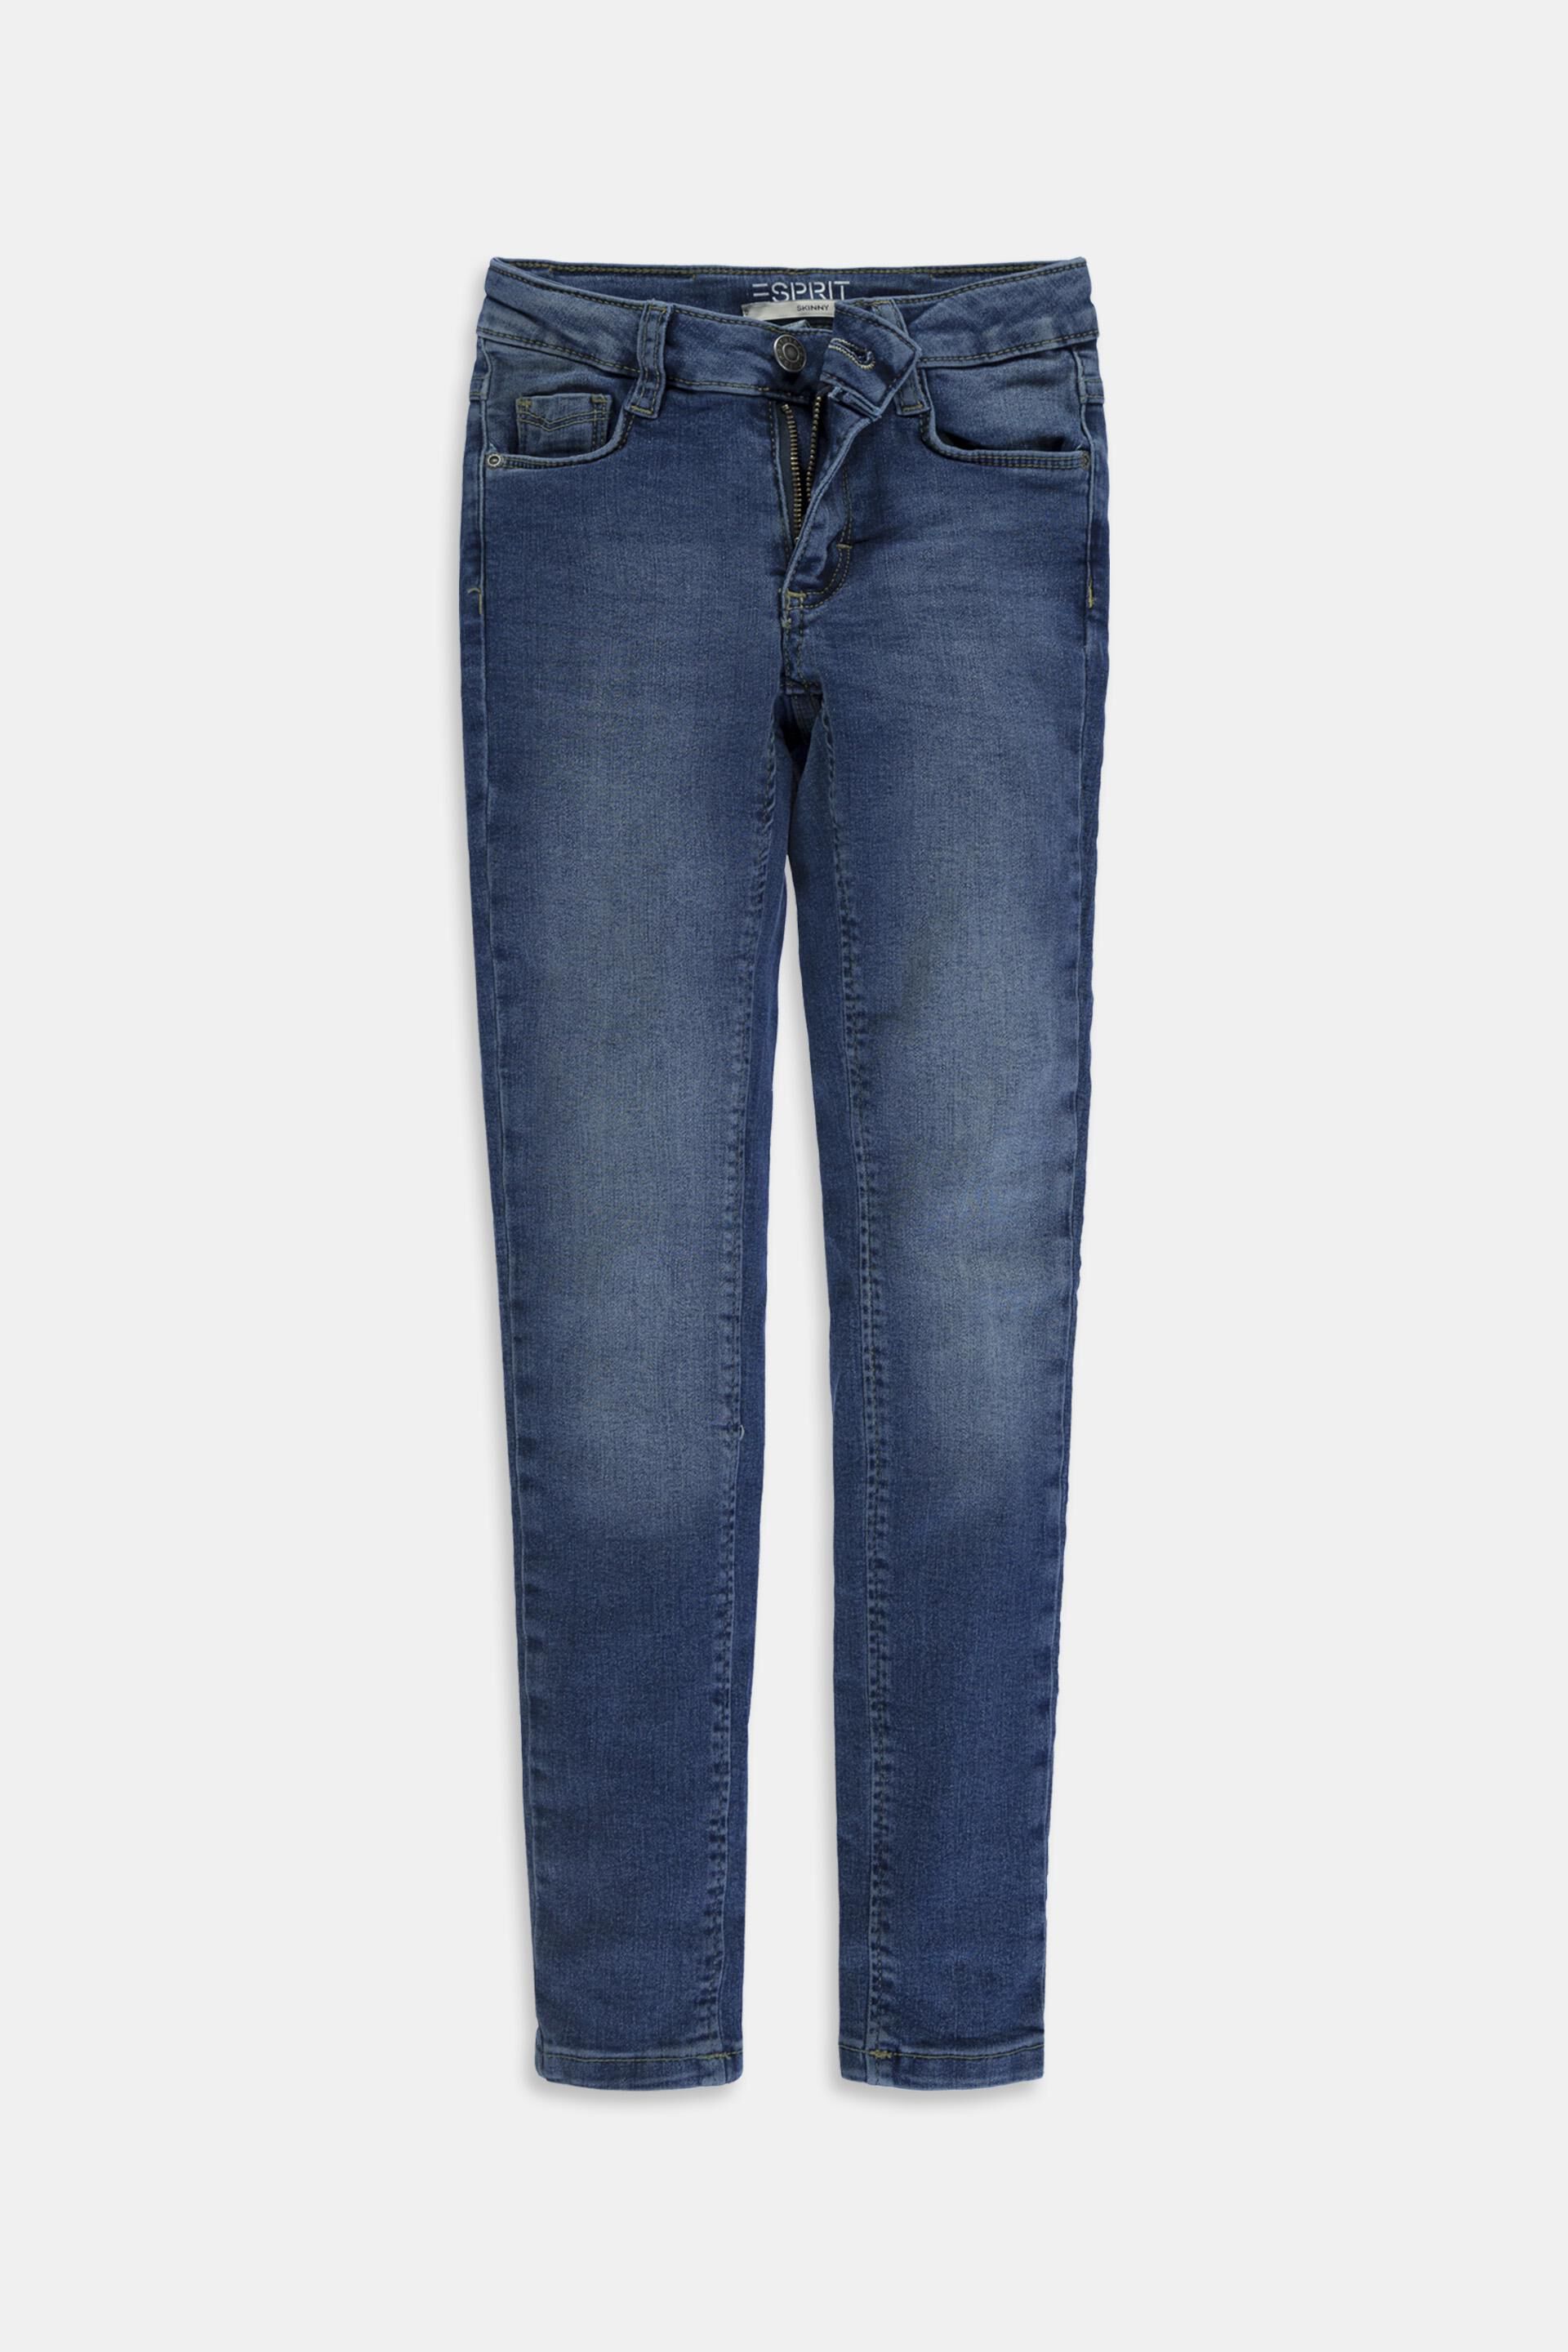 Esprit an adjustable Stretch with waistband in widths different available jeans